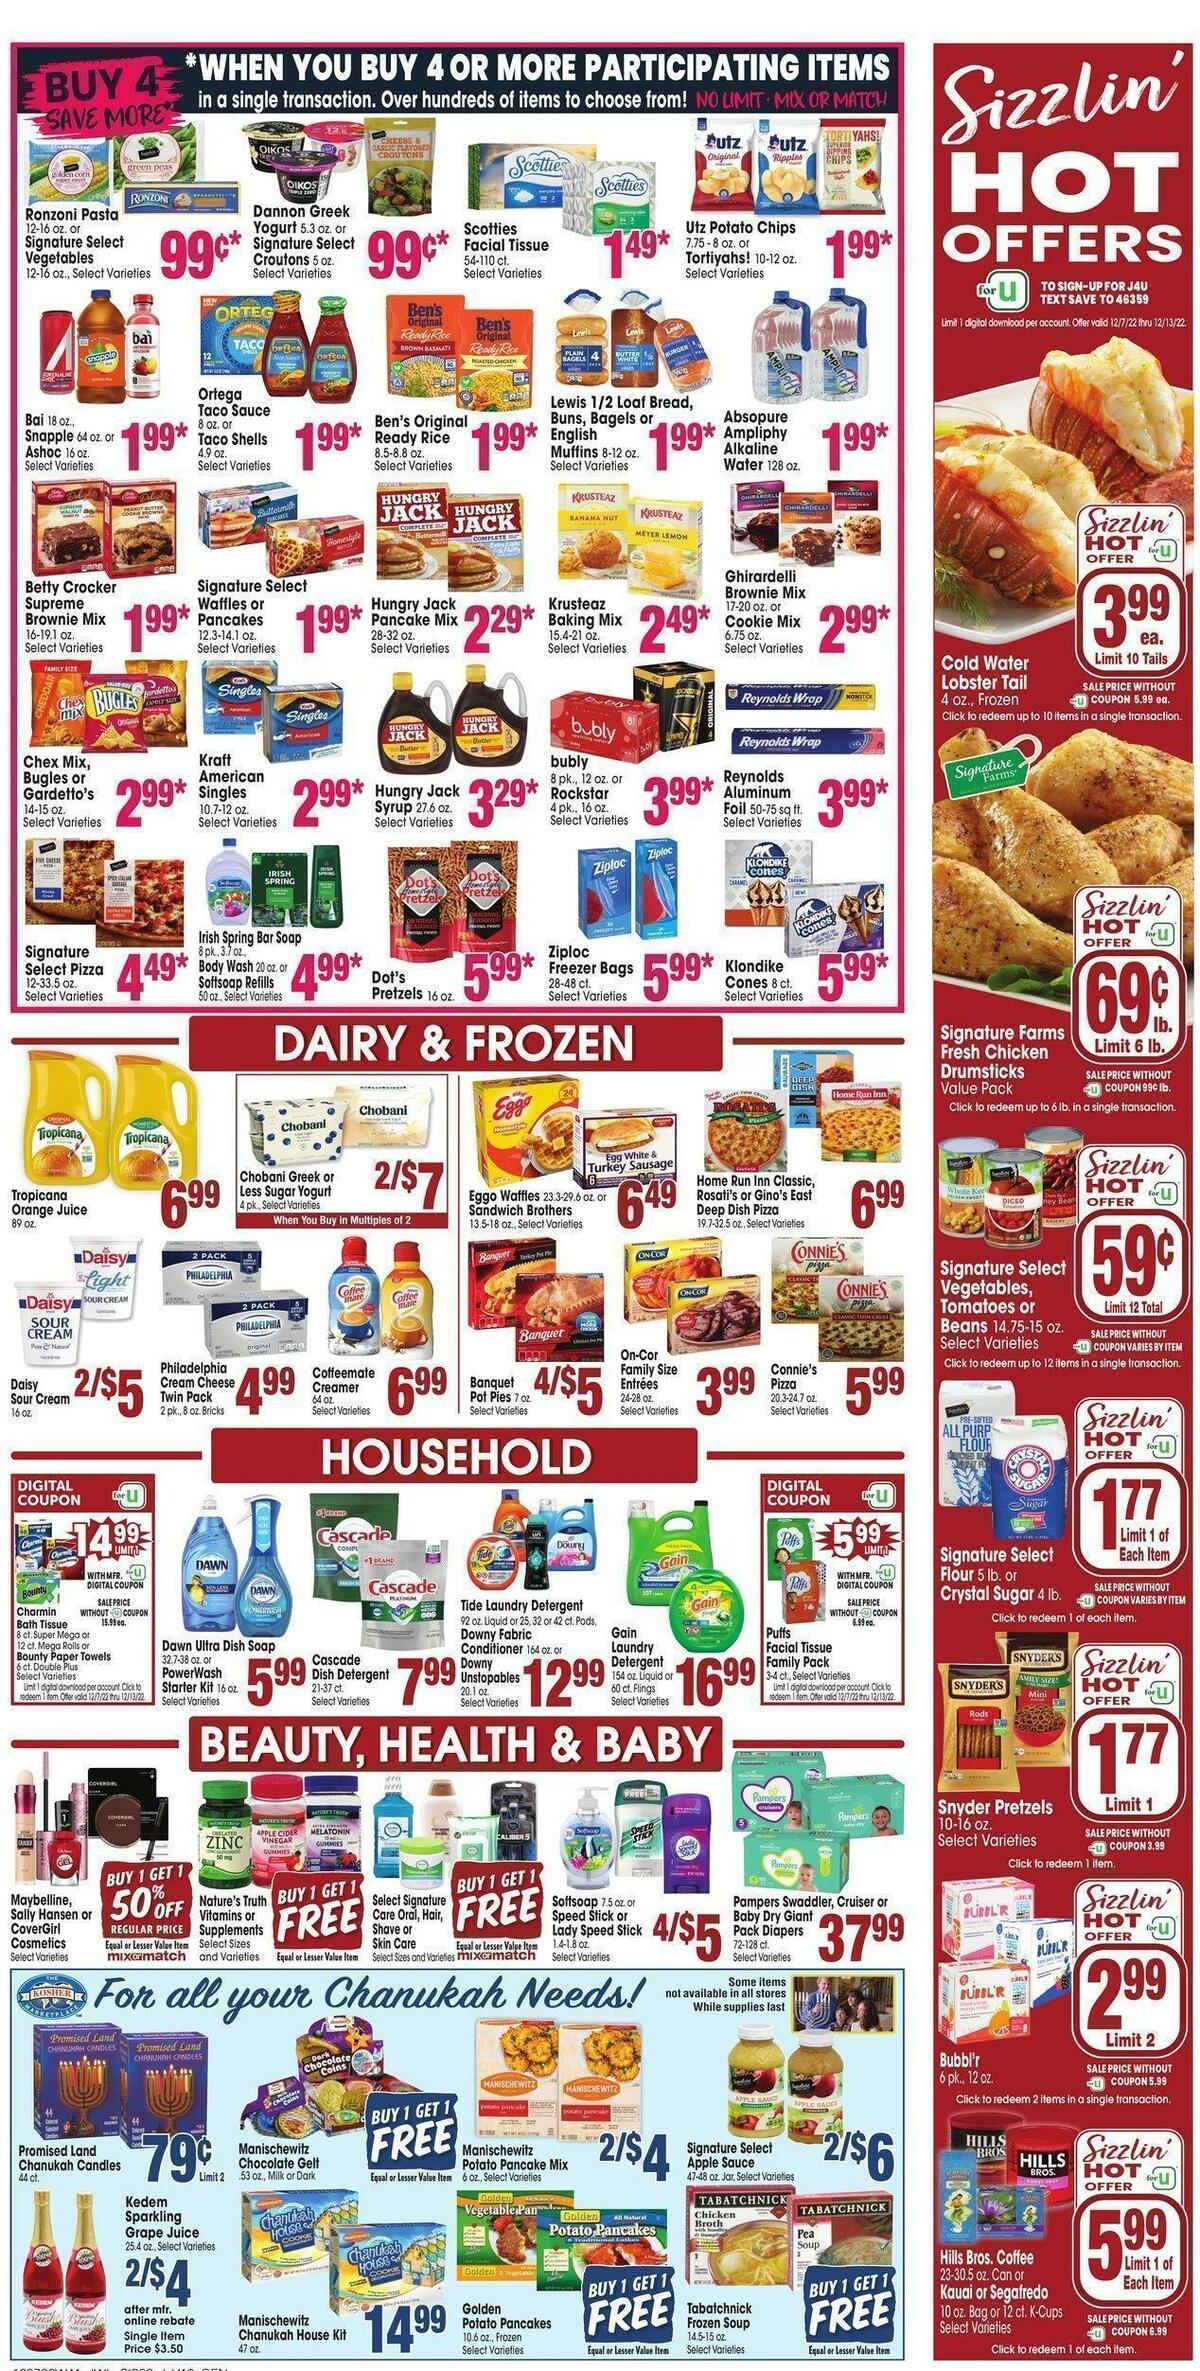 Jewel Osco Weekly Ad from December 7